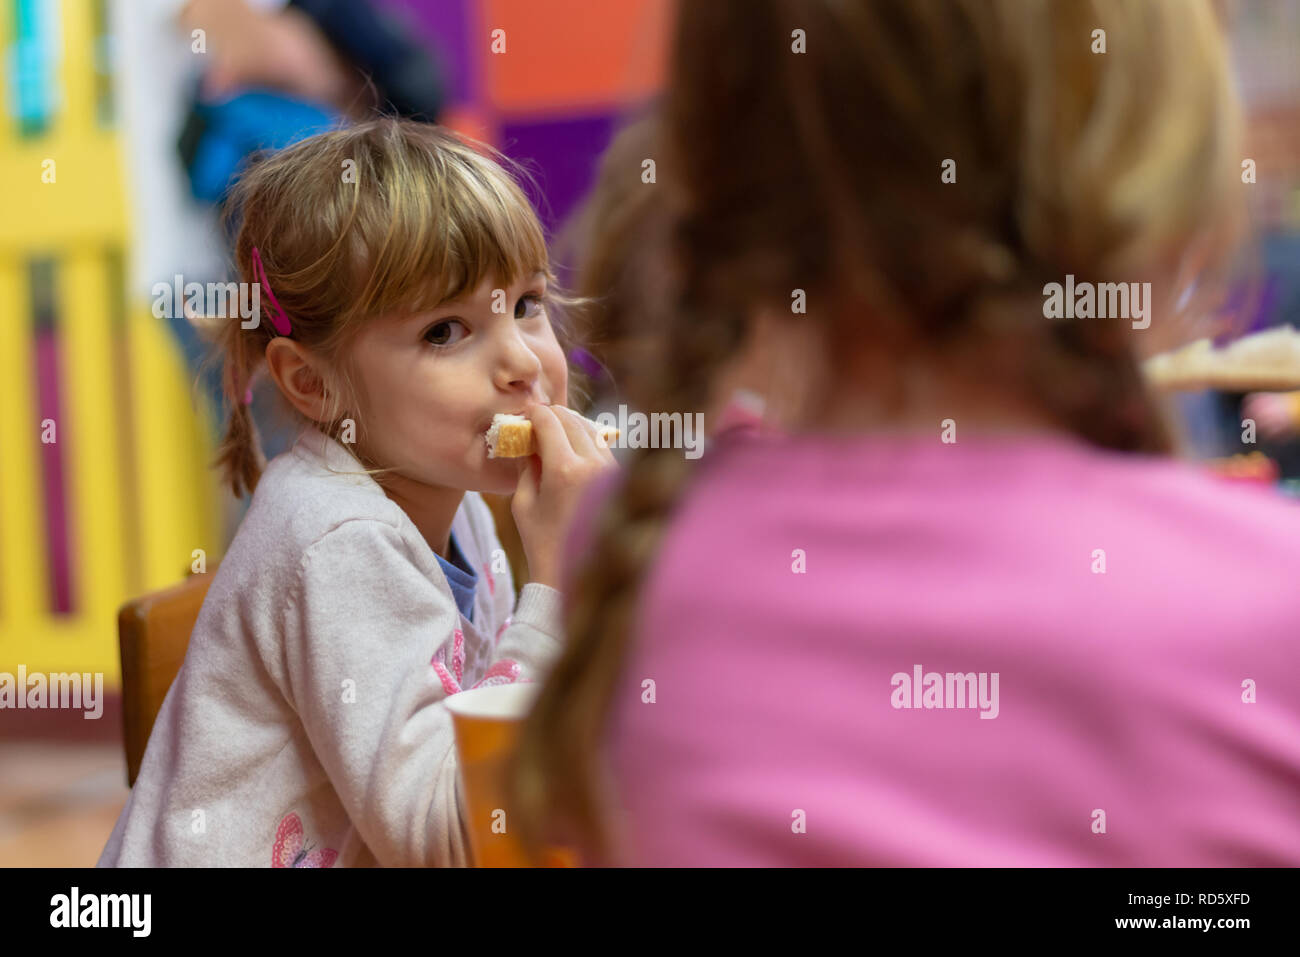 Girl eating sandwich at birthday party Stock Photo